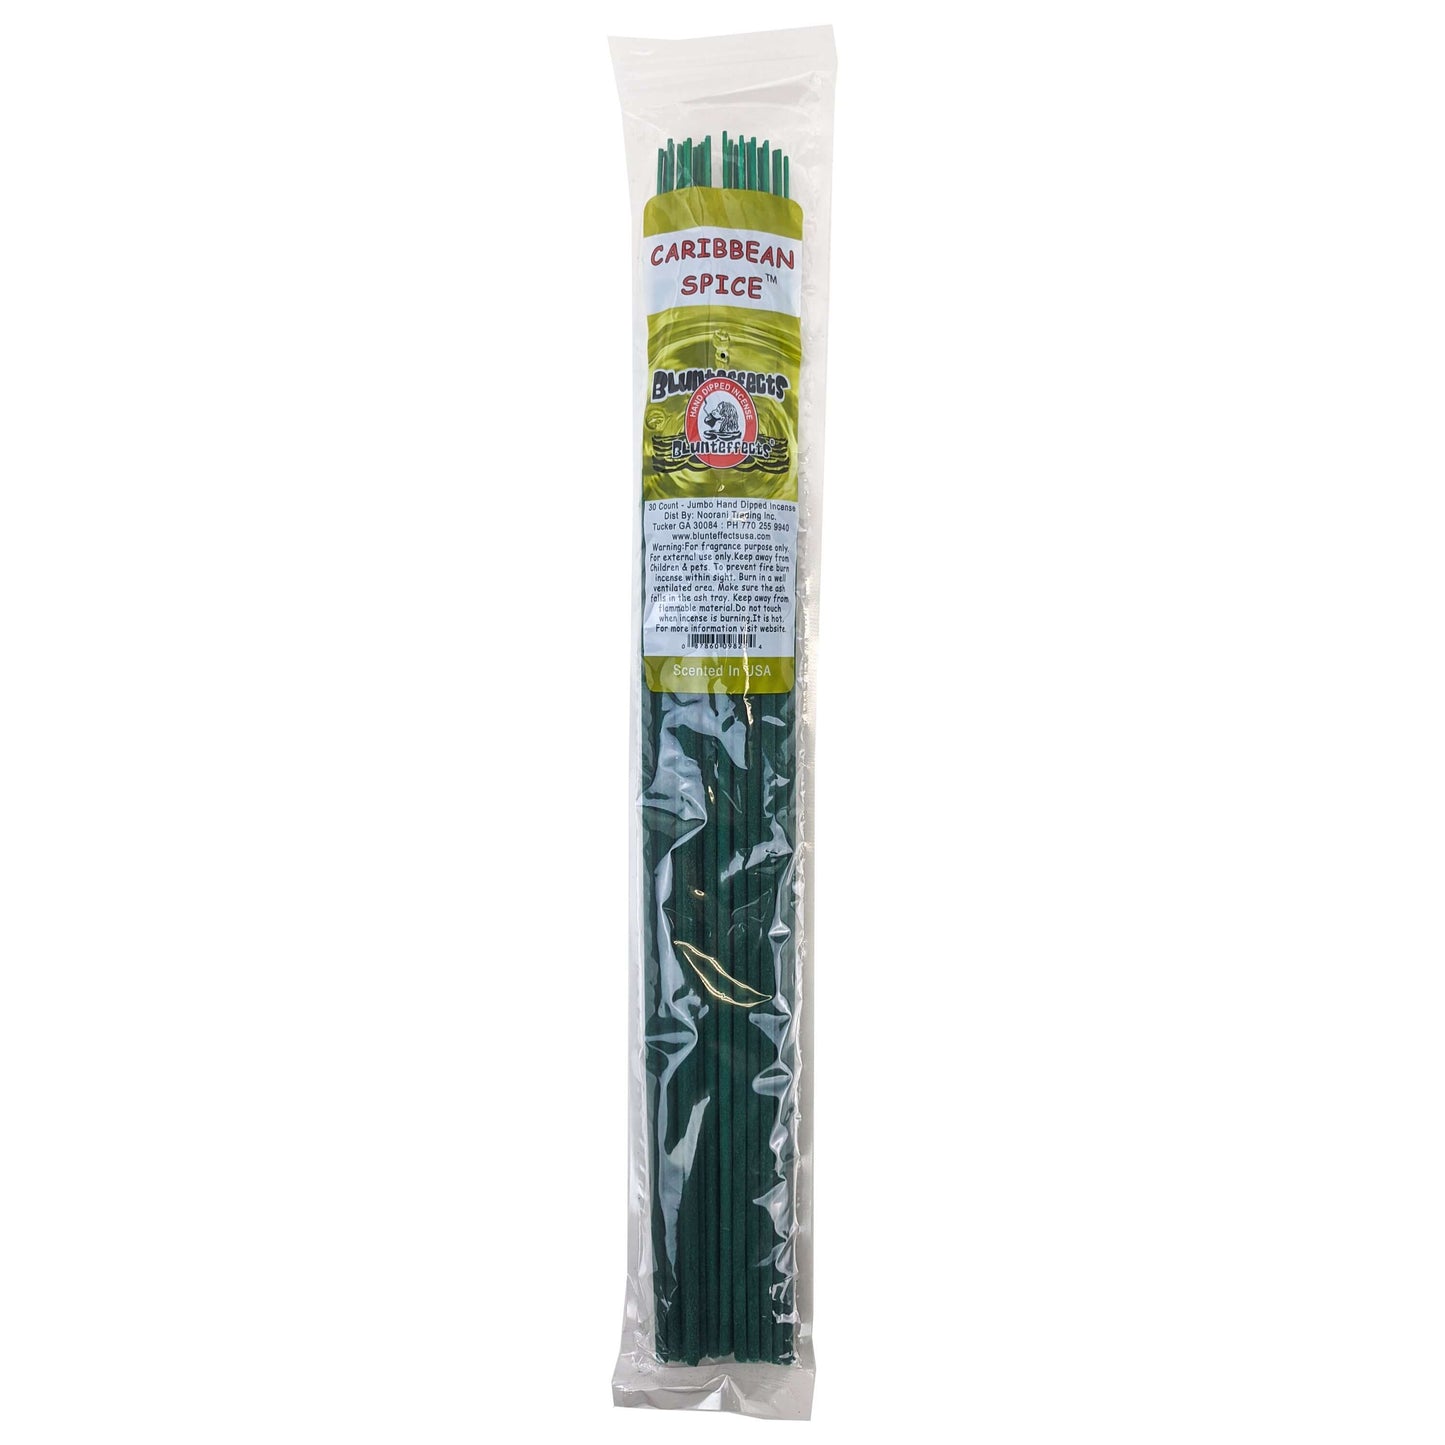 Caribbean Spice Scent, 19" BluntEffects Jumbo Incense